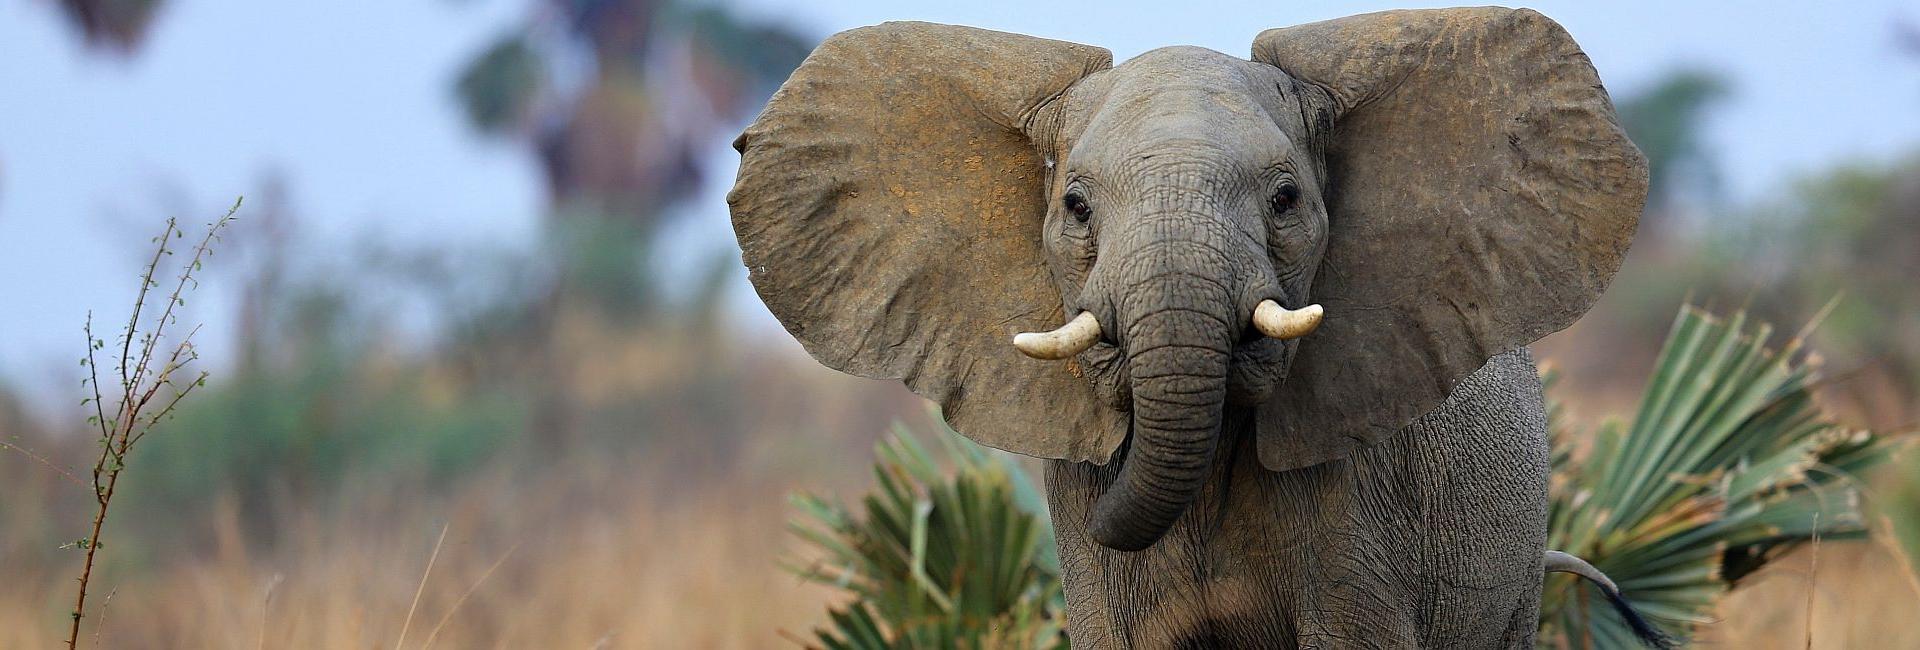 Volunteer At An Elephant Sanctuary In Africa